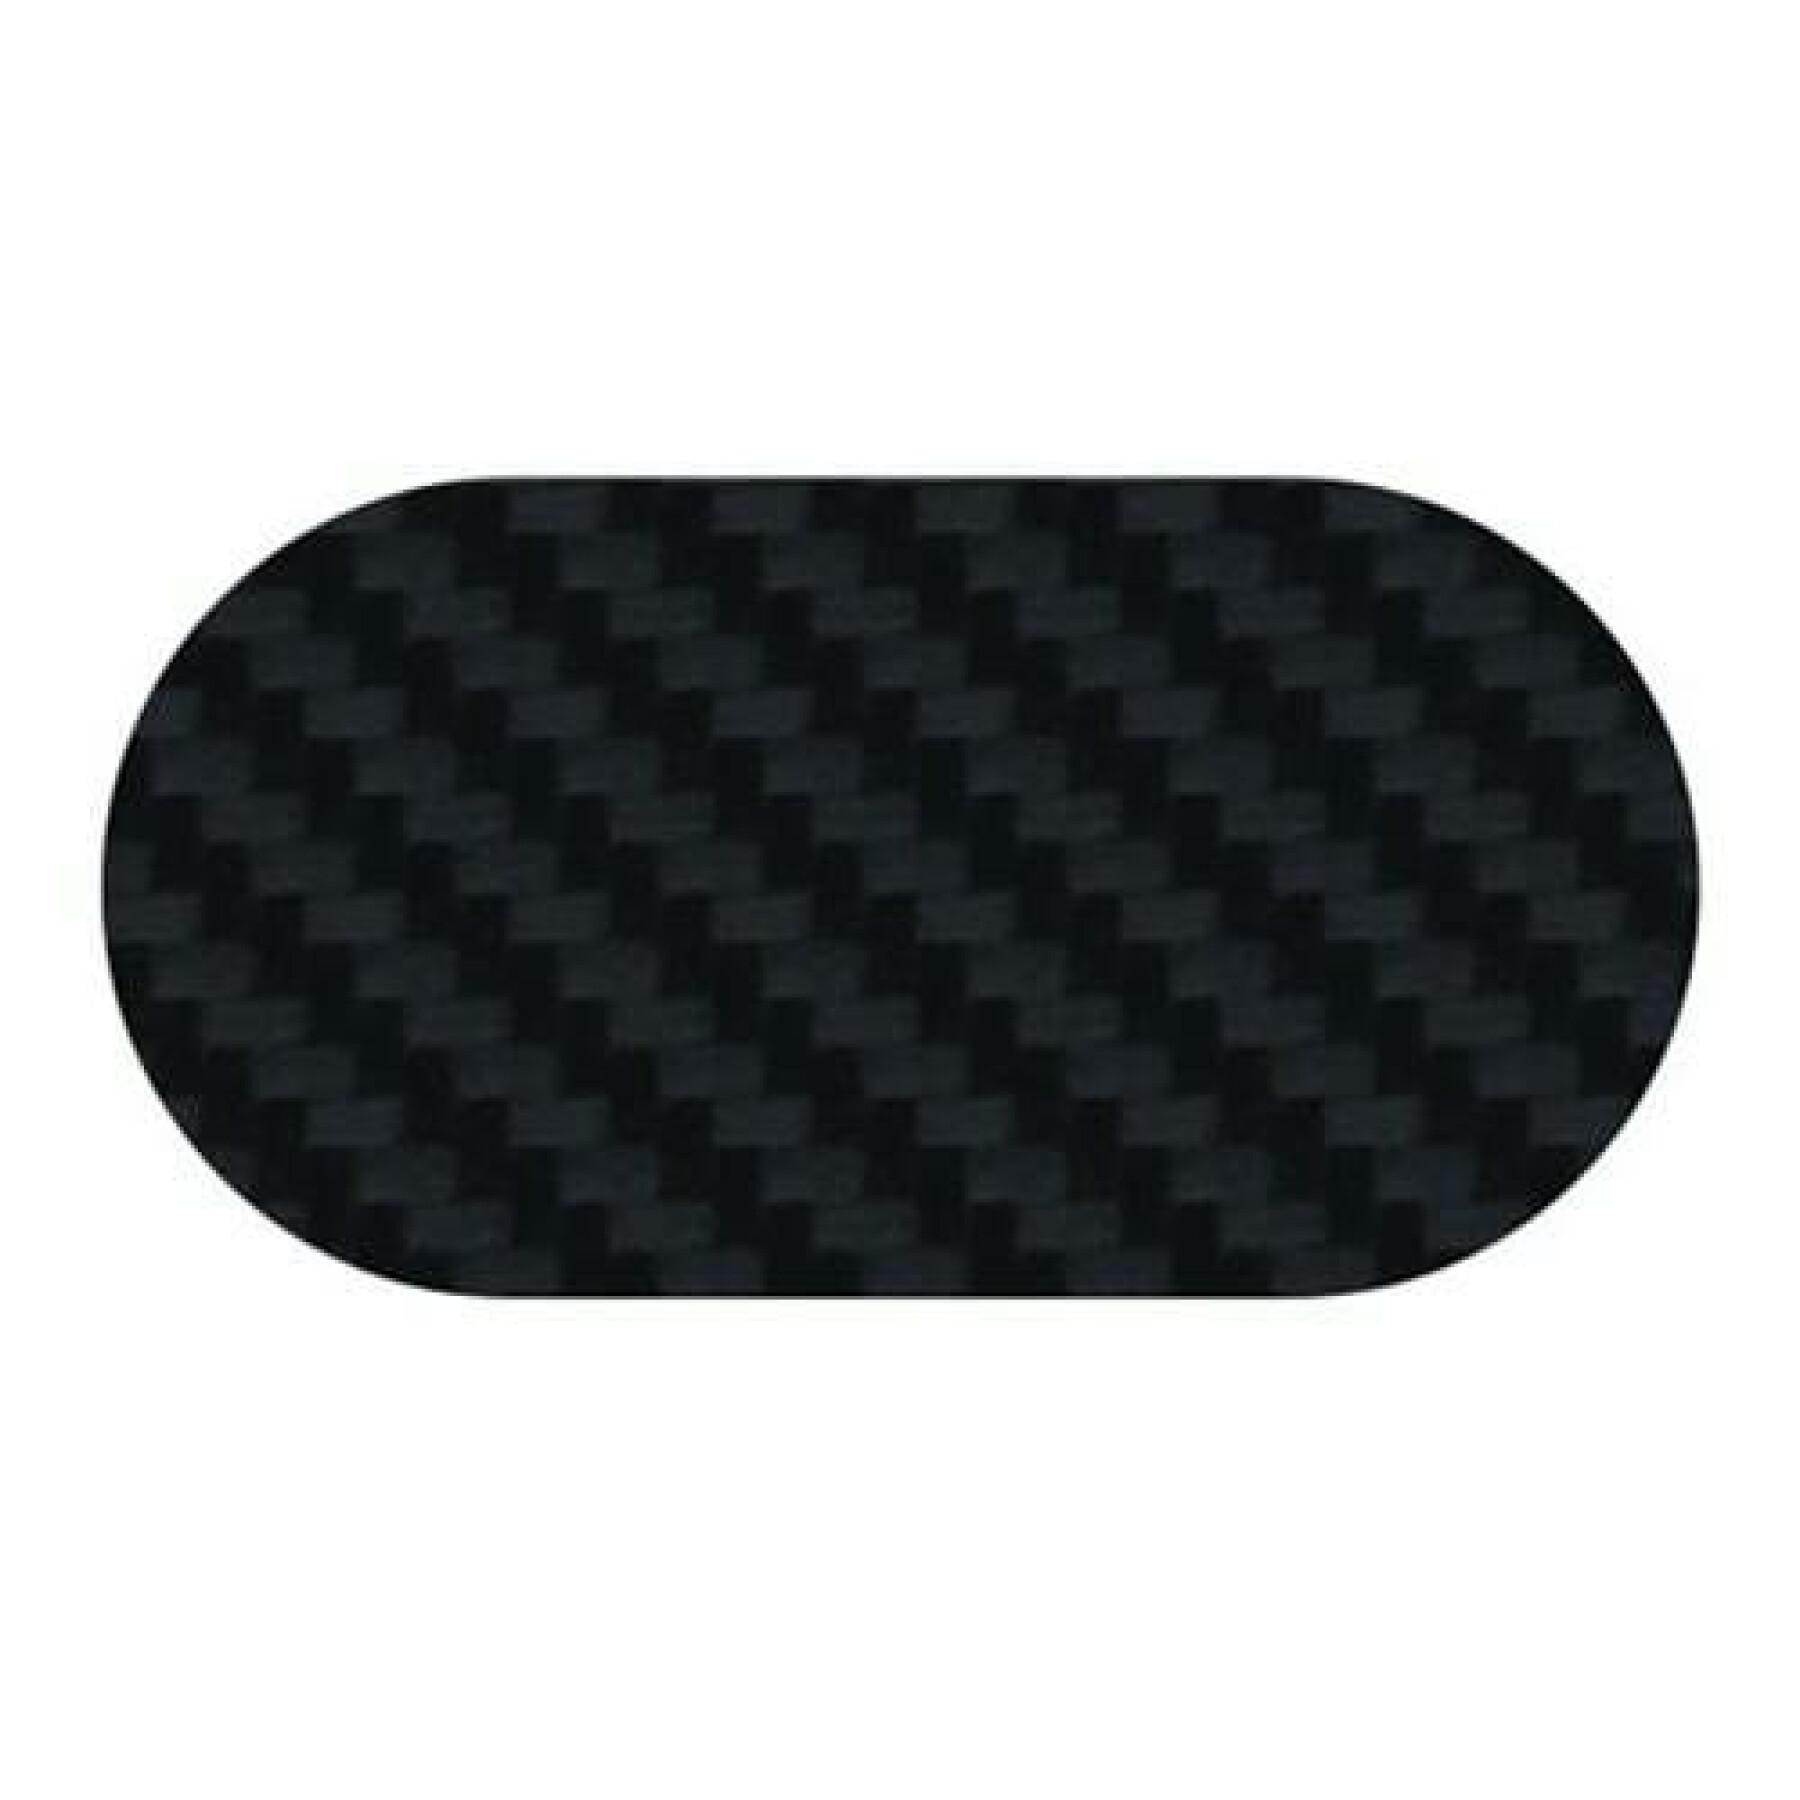 Protections cadre Lizard Skins Patch Kit-Carbon Leather